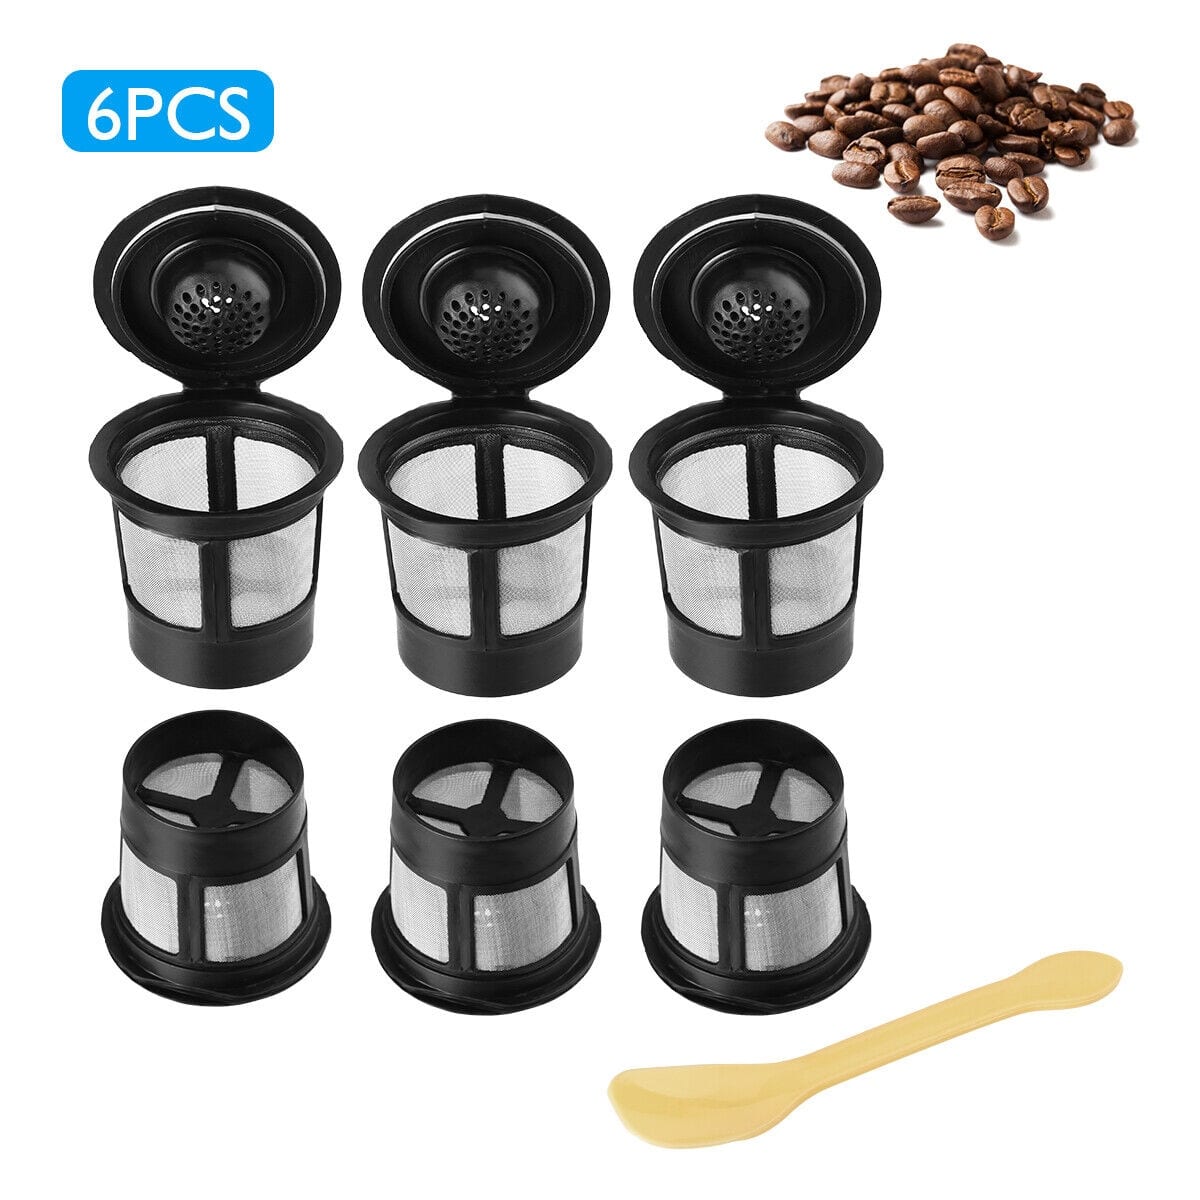 6-Pcs Reusable K-Cup Coffee Filters for Keurig - On Sale - Bed Bath ...